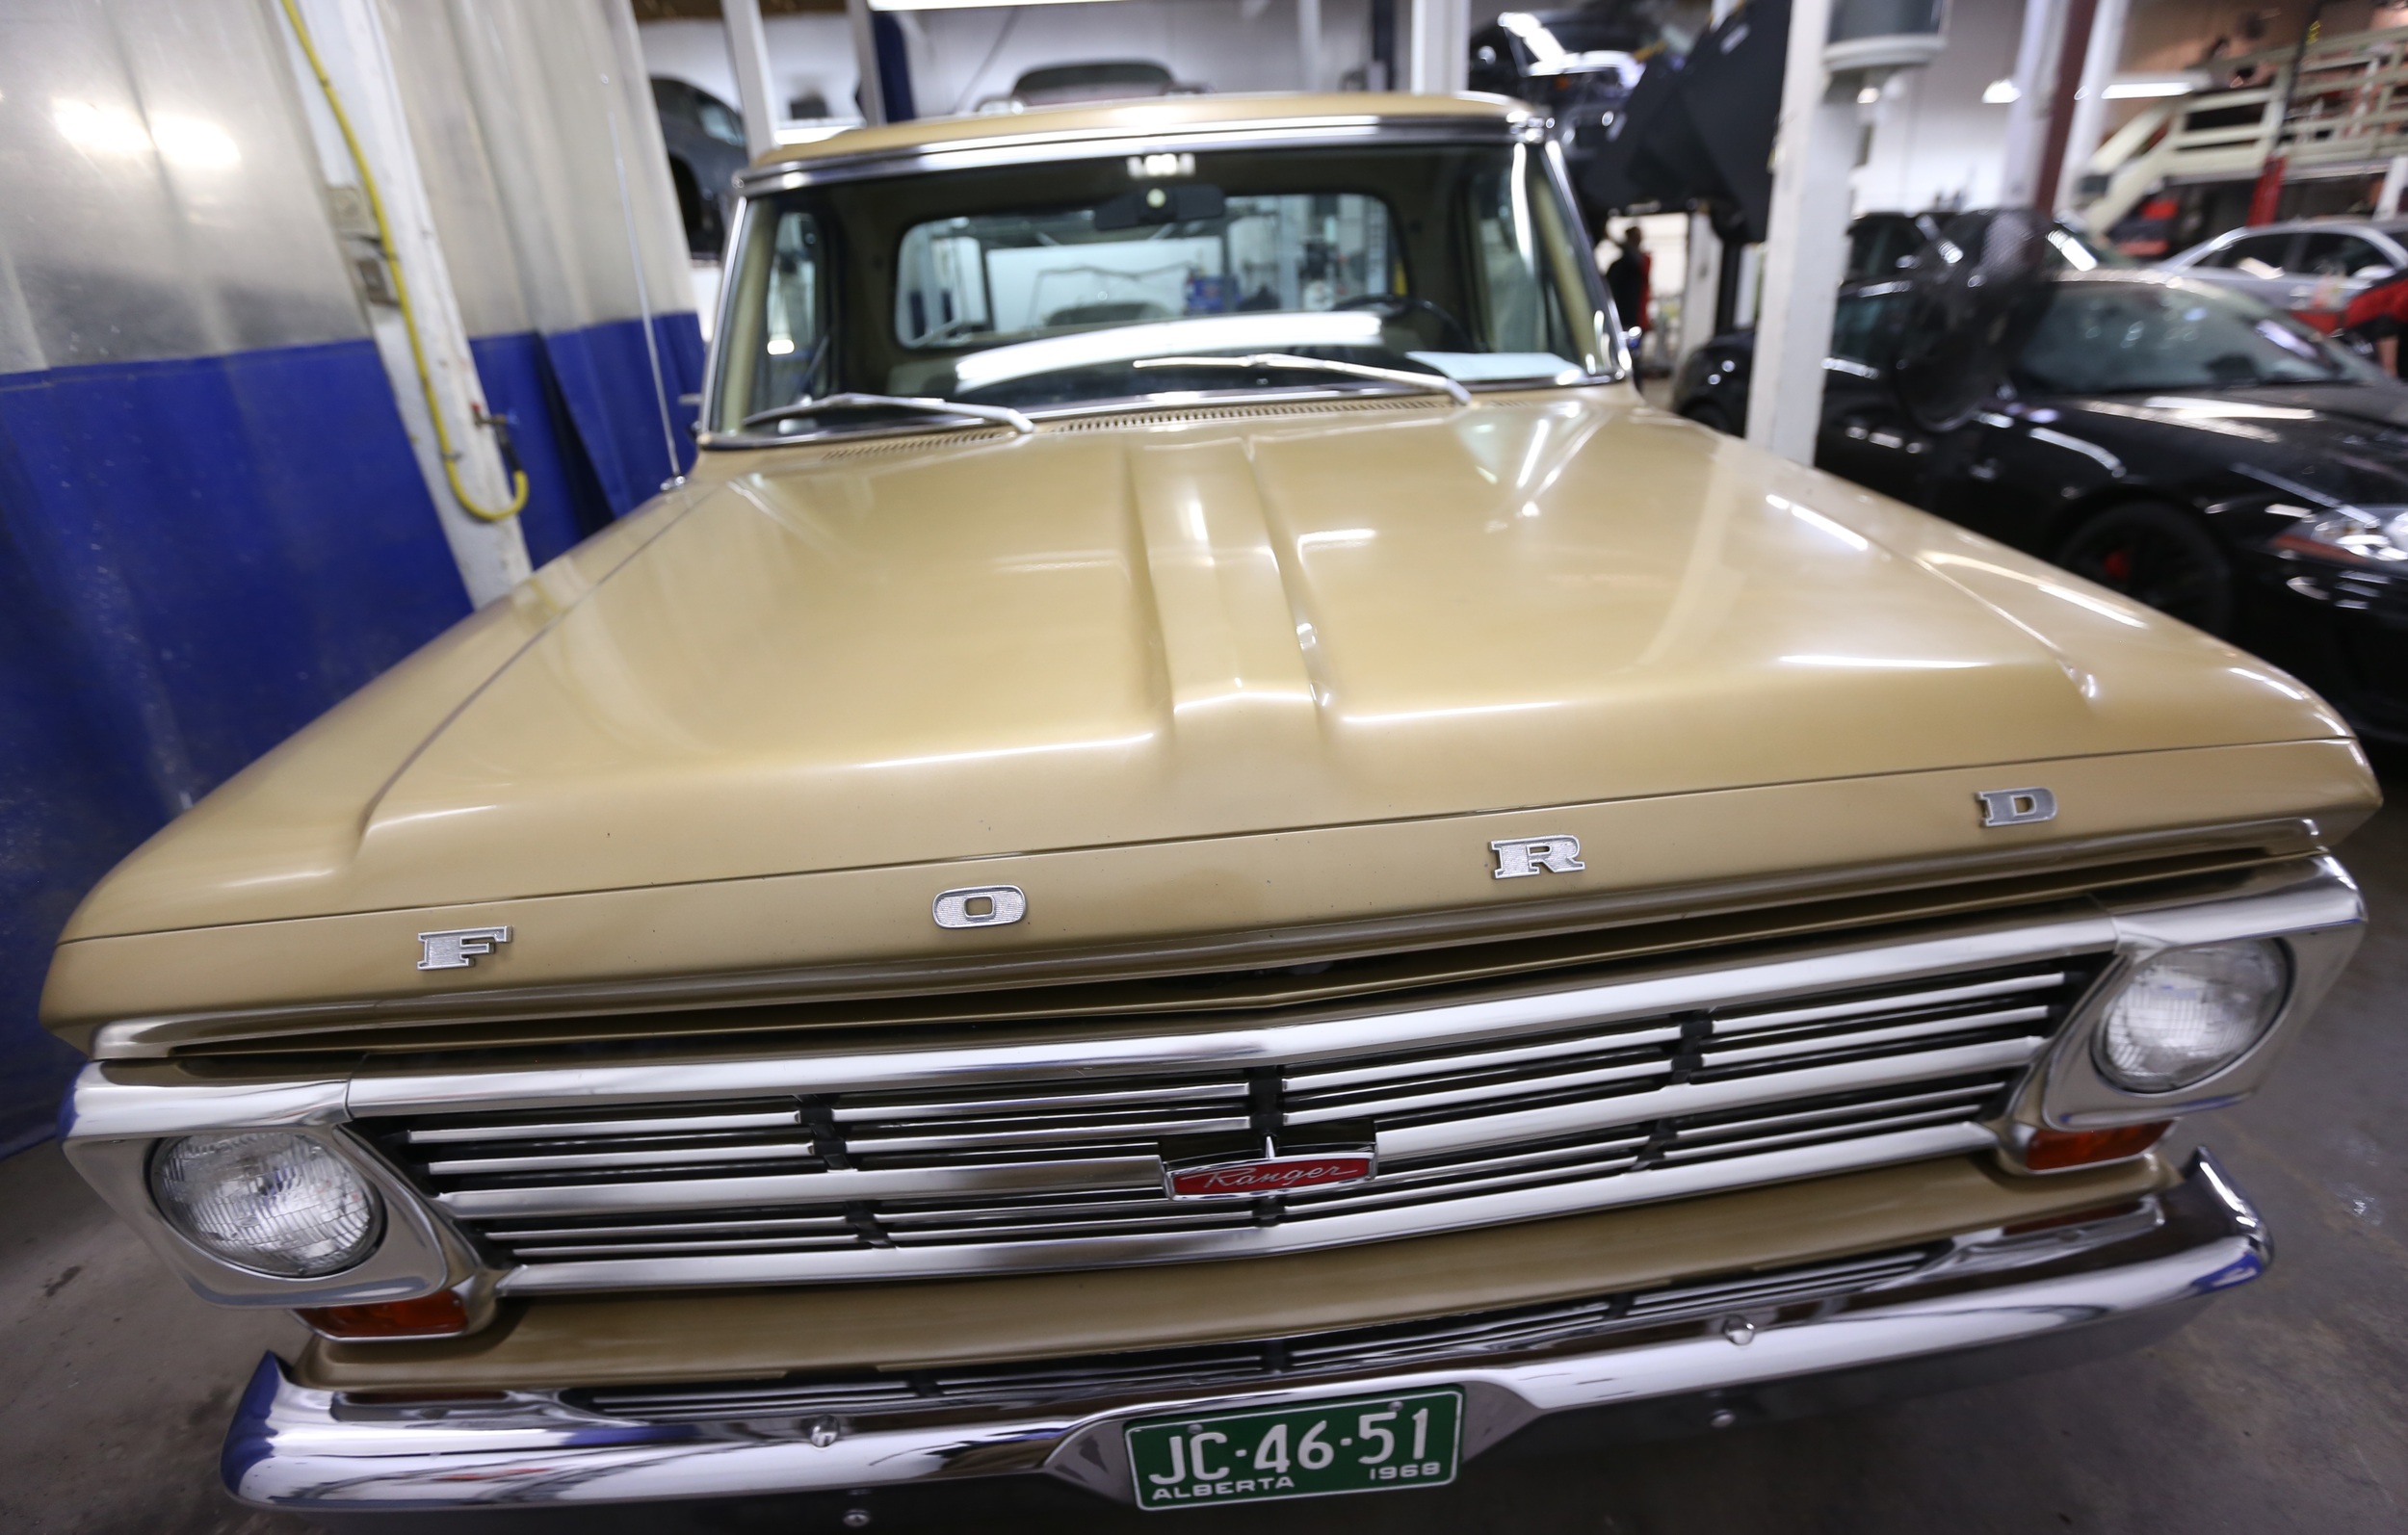  It is so amazing! I haven’t seen the interior that colour in years. The car finally got its shine pop back.   -Doug G.  